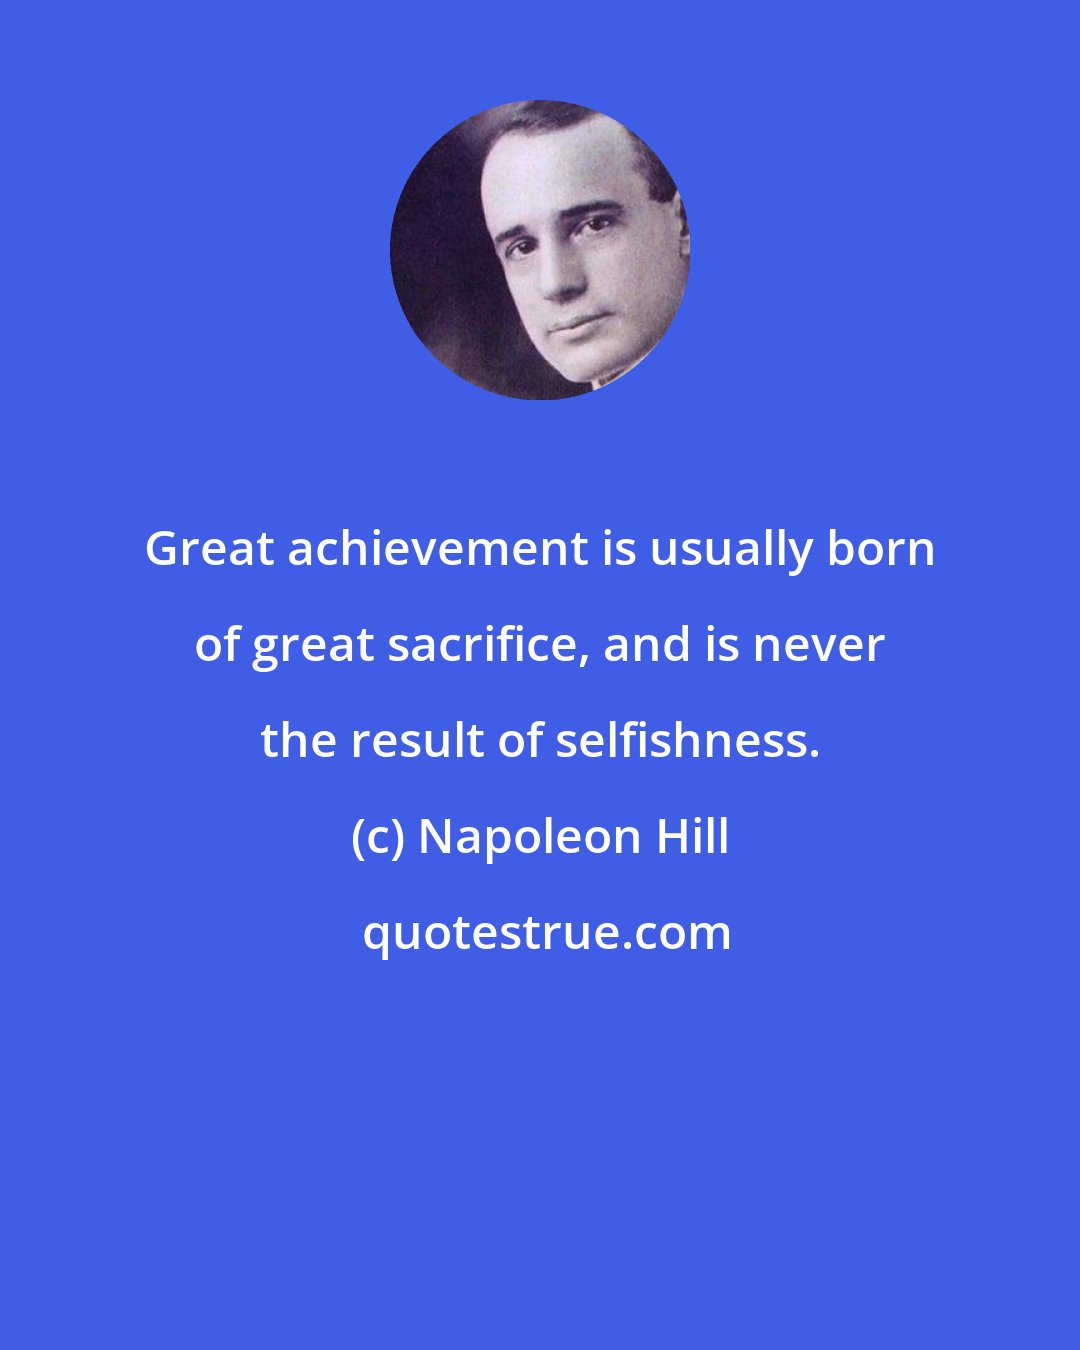 Napoleon Hill: Great achievement is usually born of great sacrifice, and is never the result of selfishness.